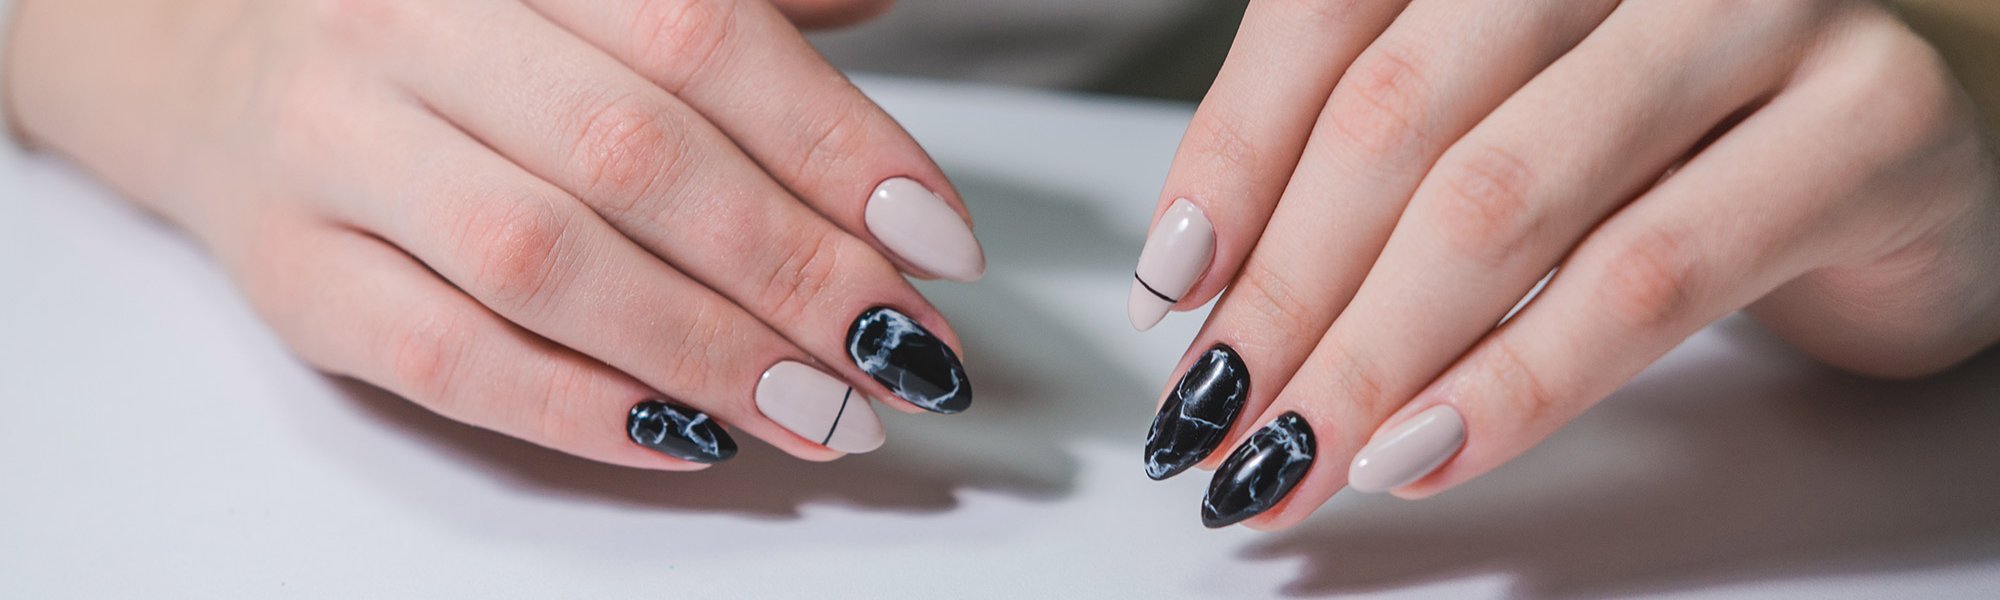 Marble Nail Designs Are Trending, Here's How To Get The Look - L'Oréal Paris